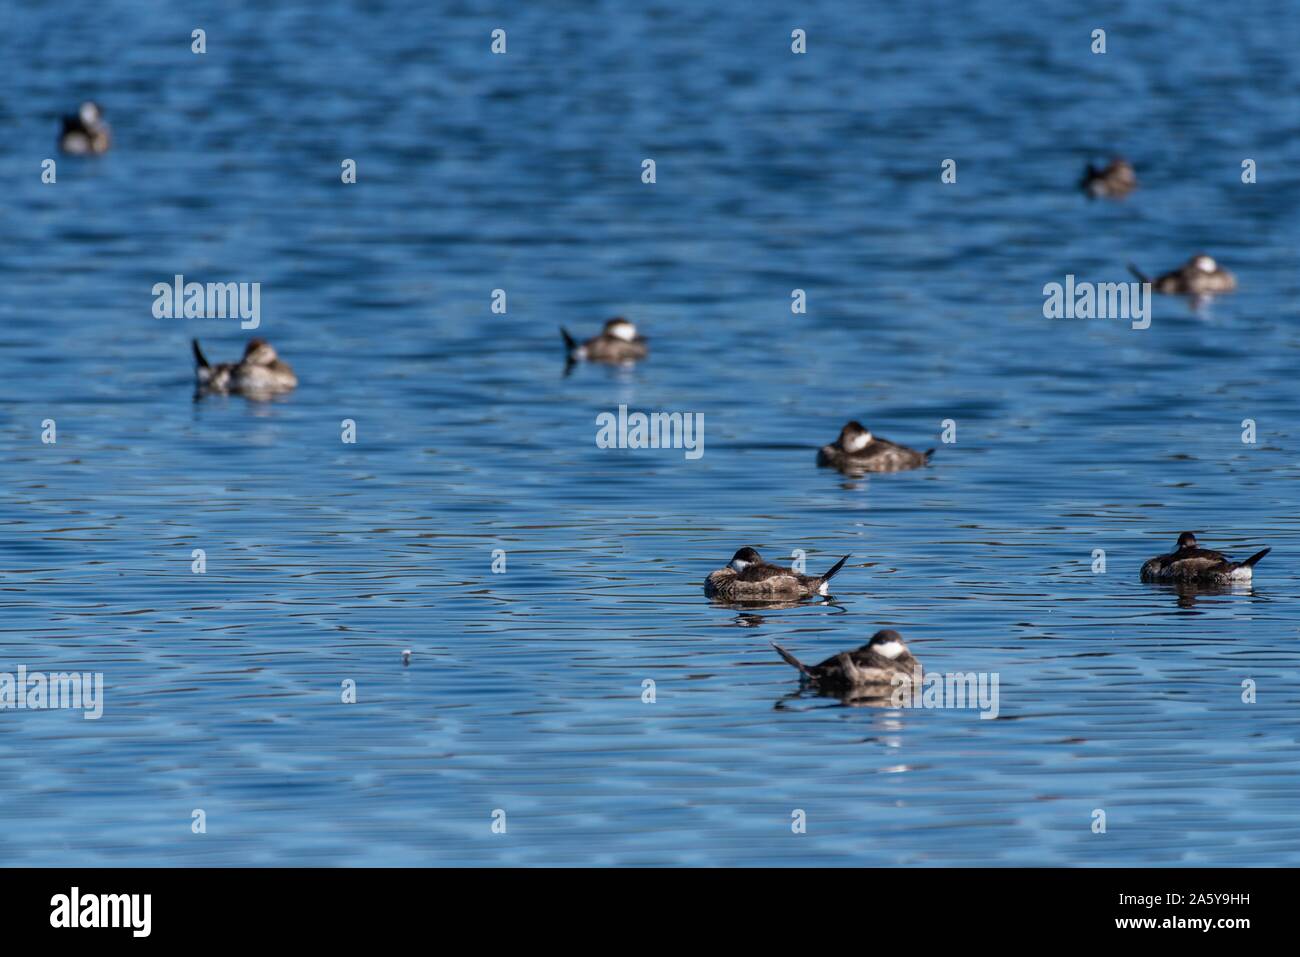 Group of sleeping Ruddy Ducks have heads safely tucked while floating together on pond water surface. Stock Photo